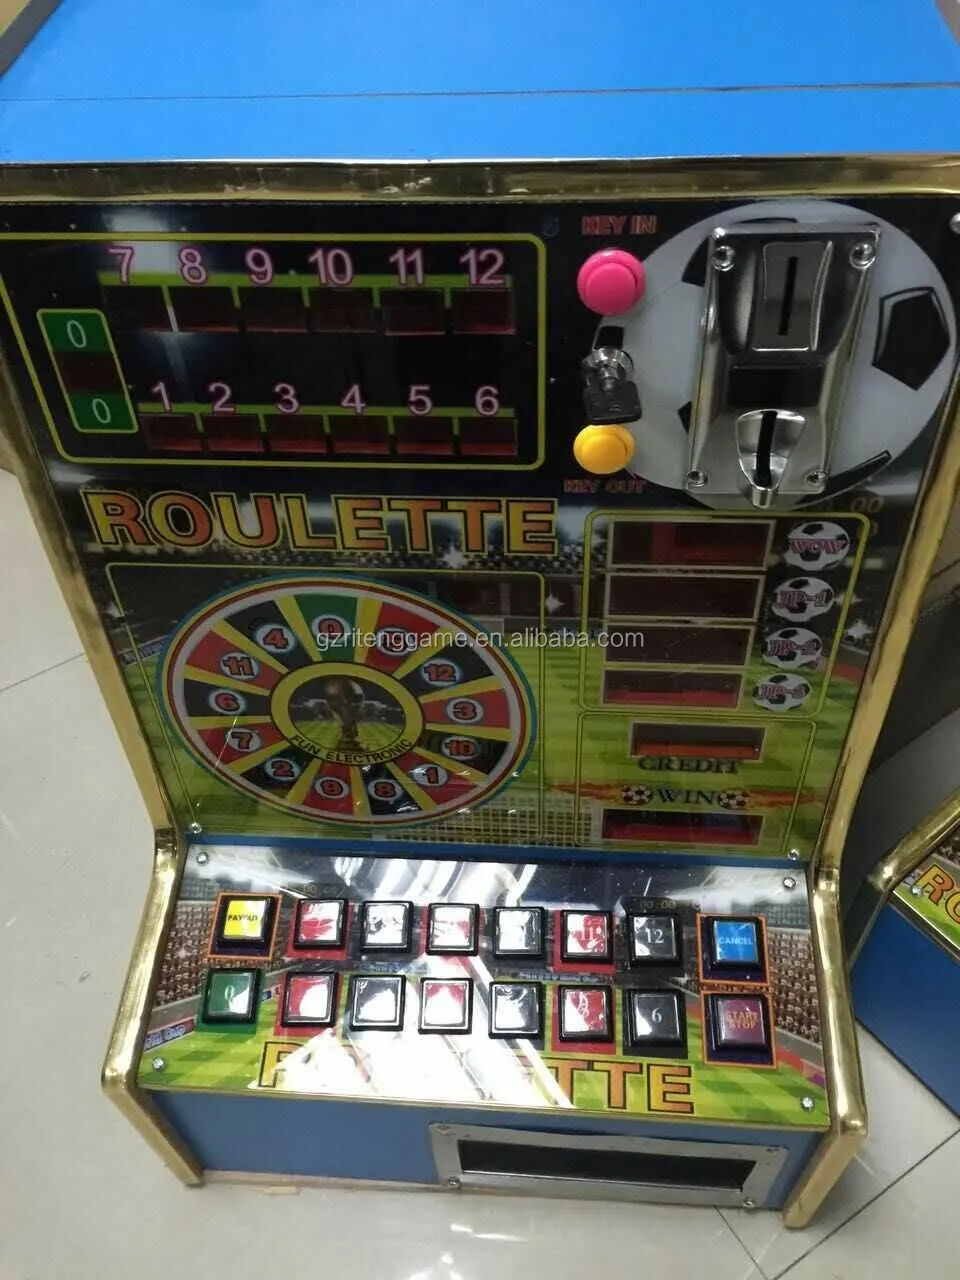 Roulette spin